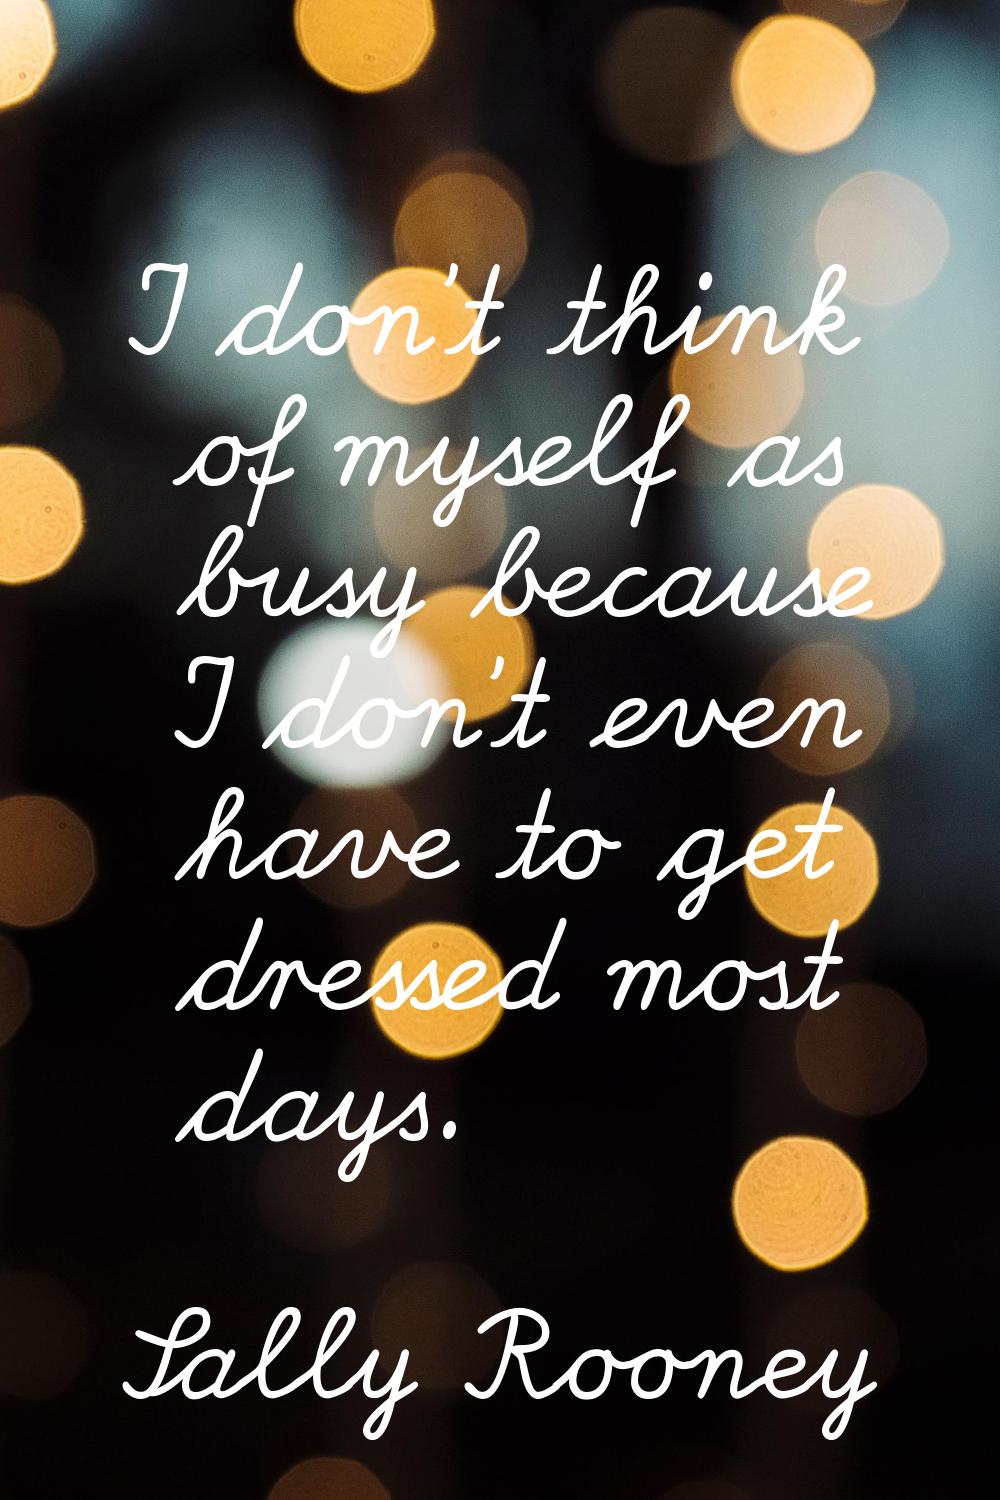 I don't think of myself as busy because I don't even have to get dressed most days.